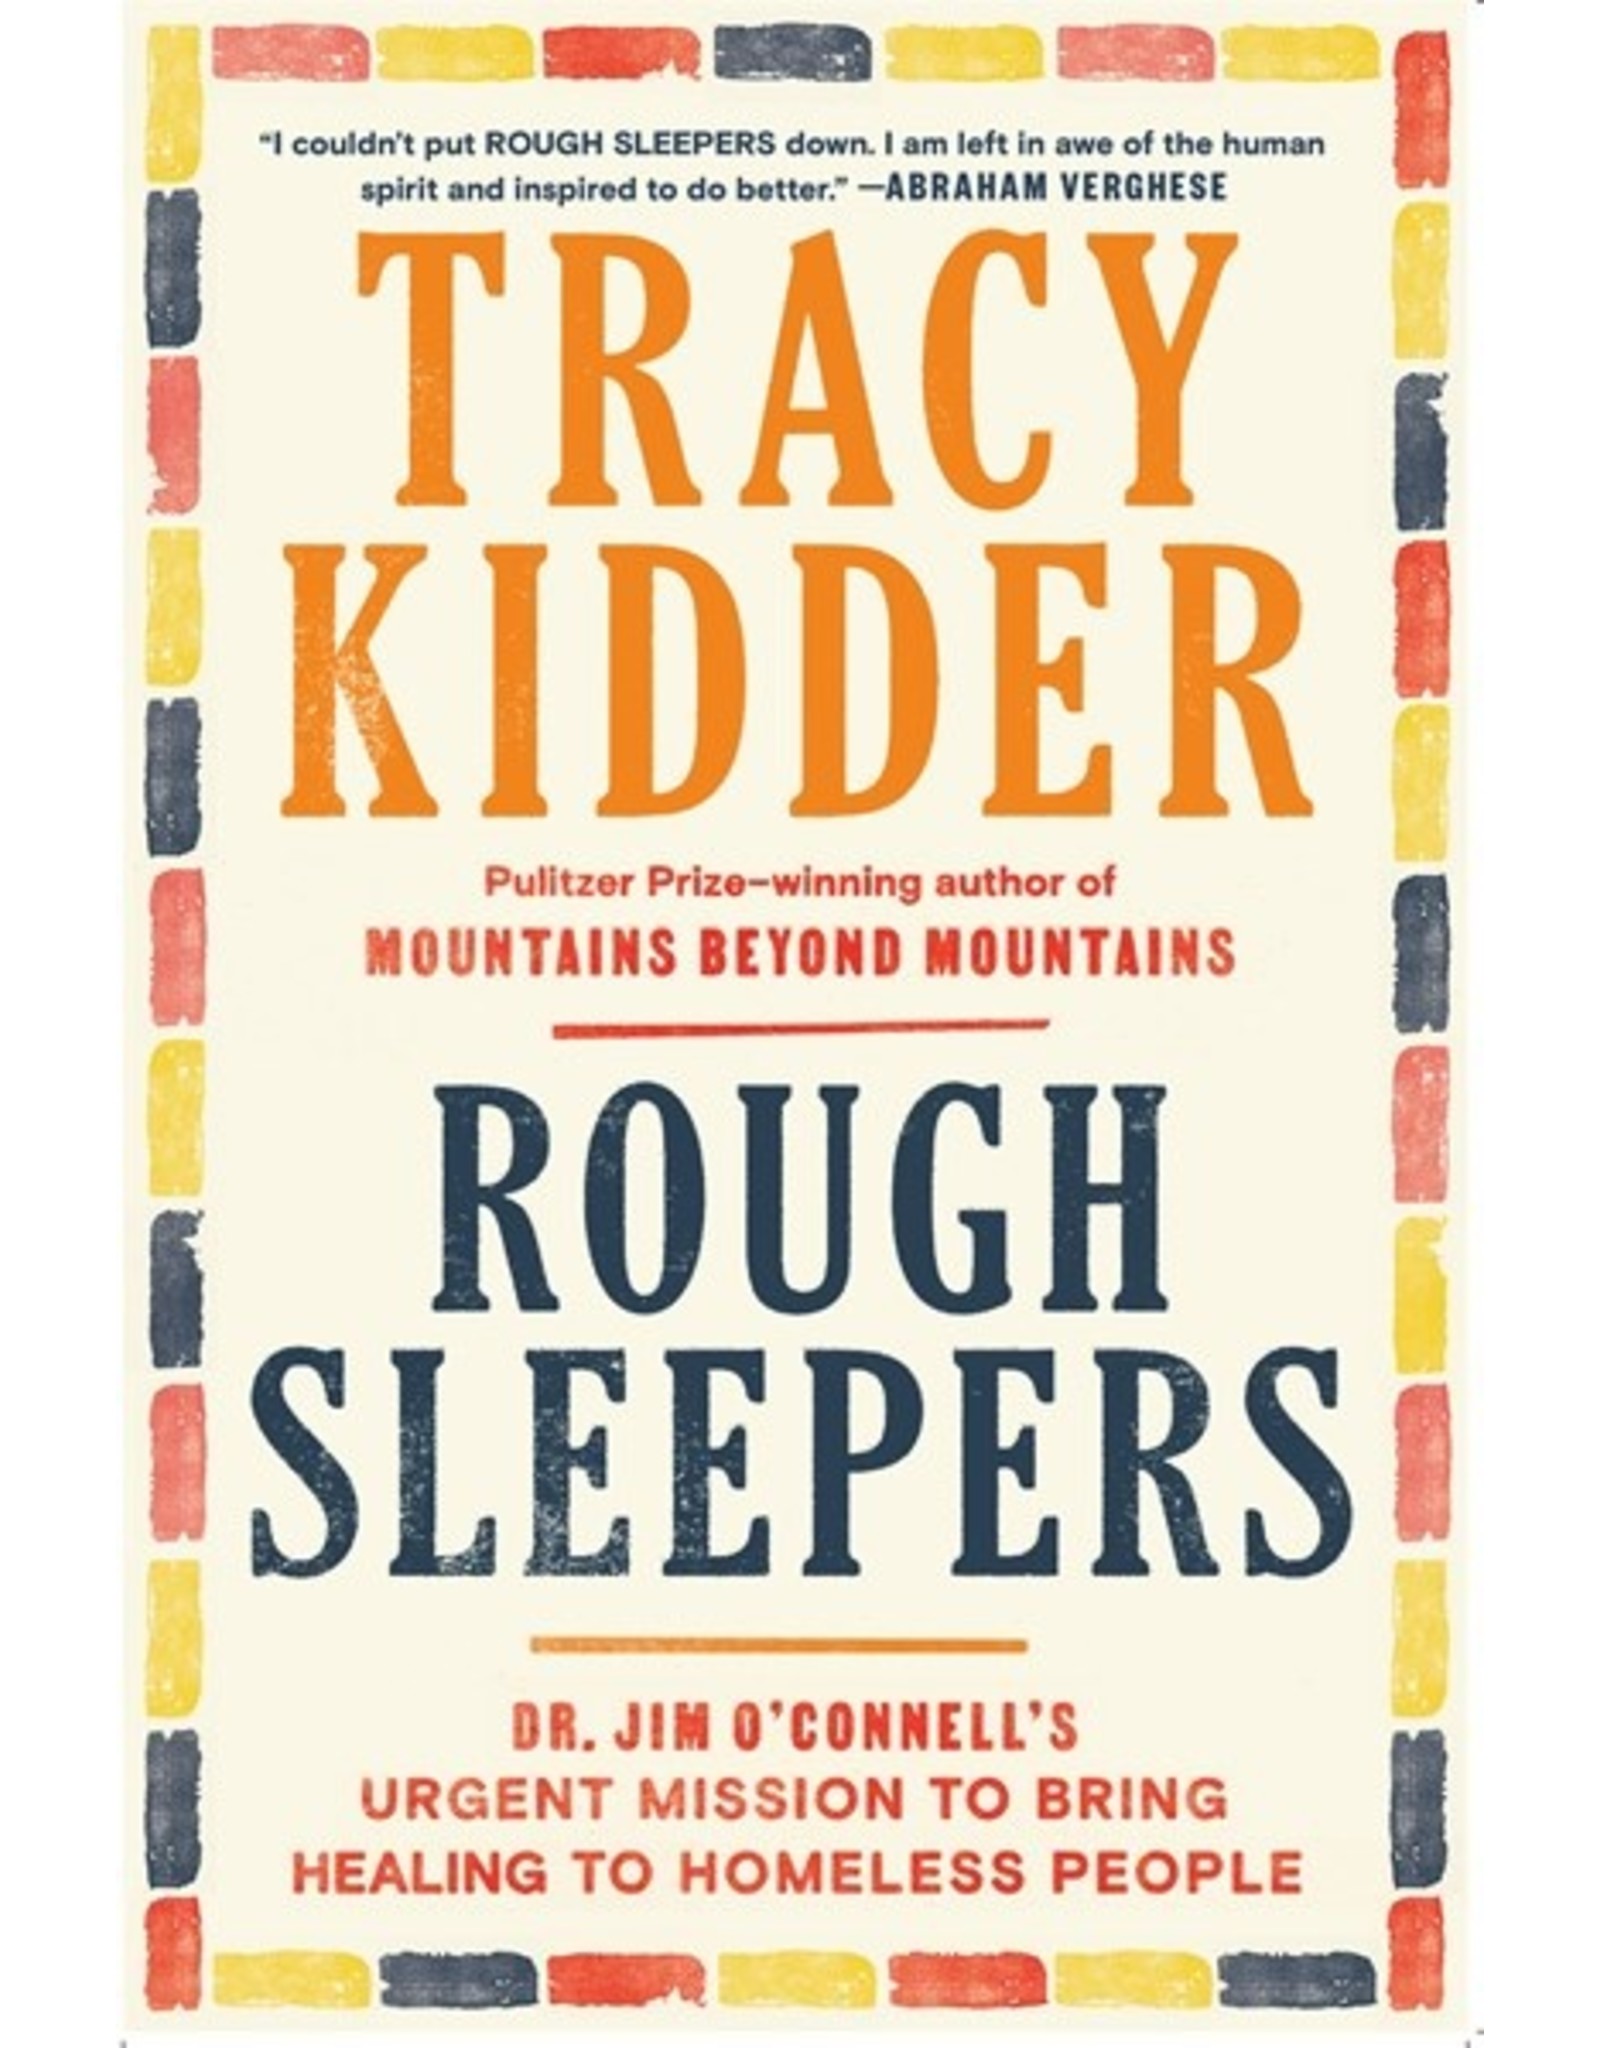 Books Rough Sleepers : Dr. Jim O'Connell's Urgent Mission to Bring Healing to Homeless People by Tracy Kidder